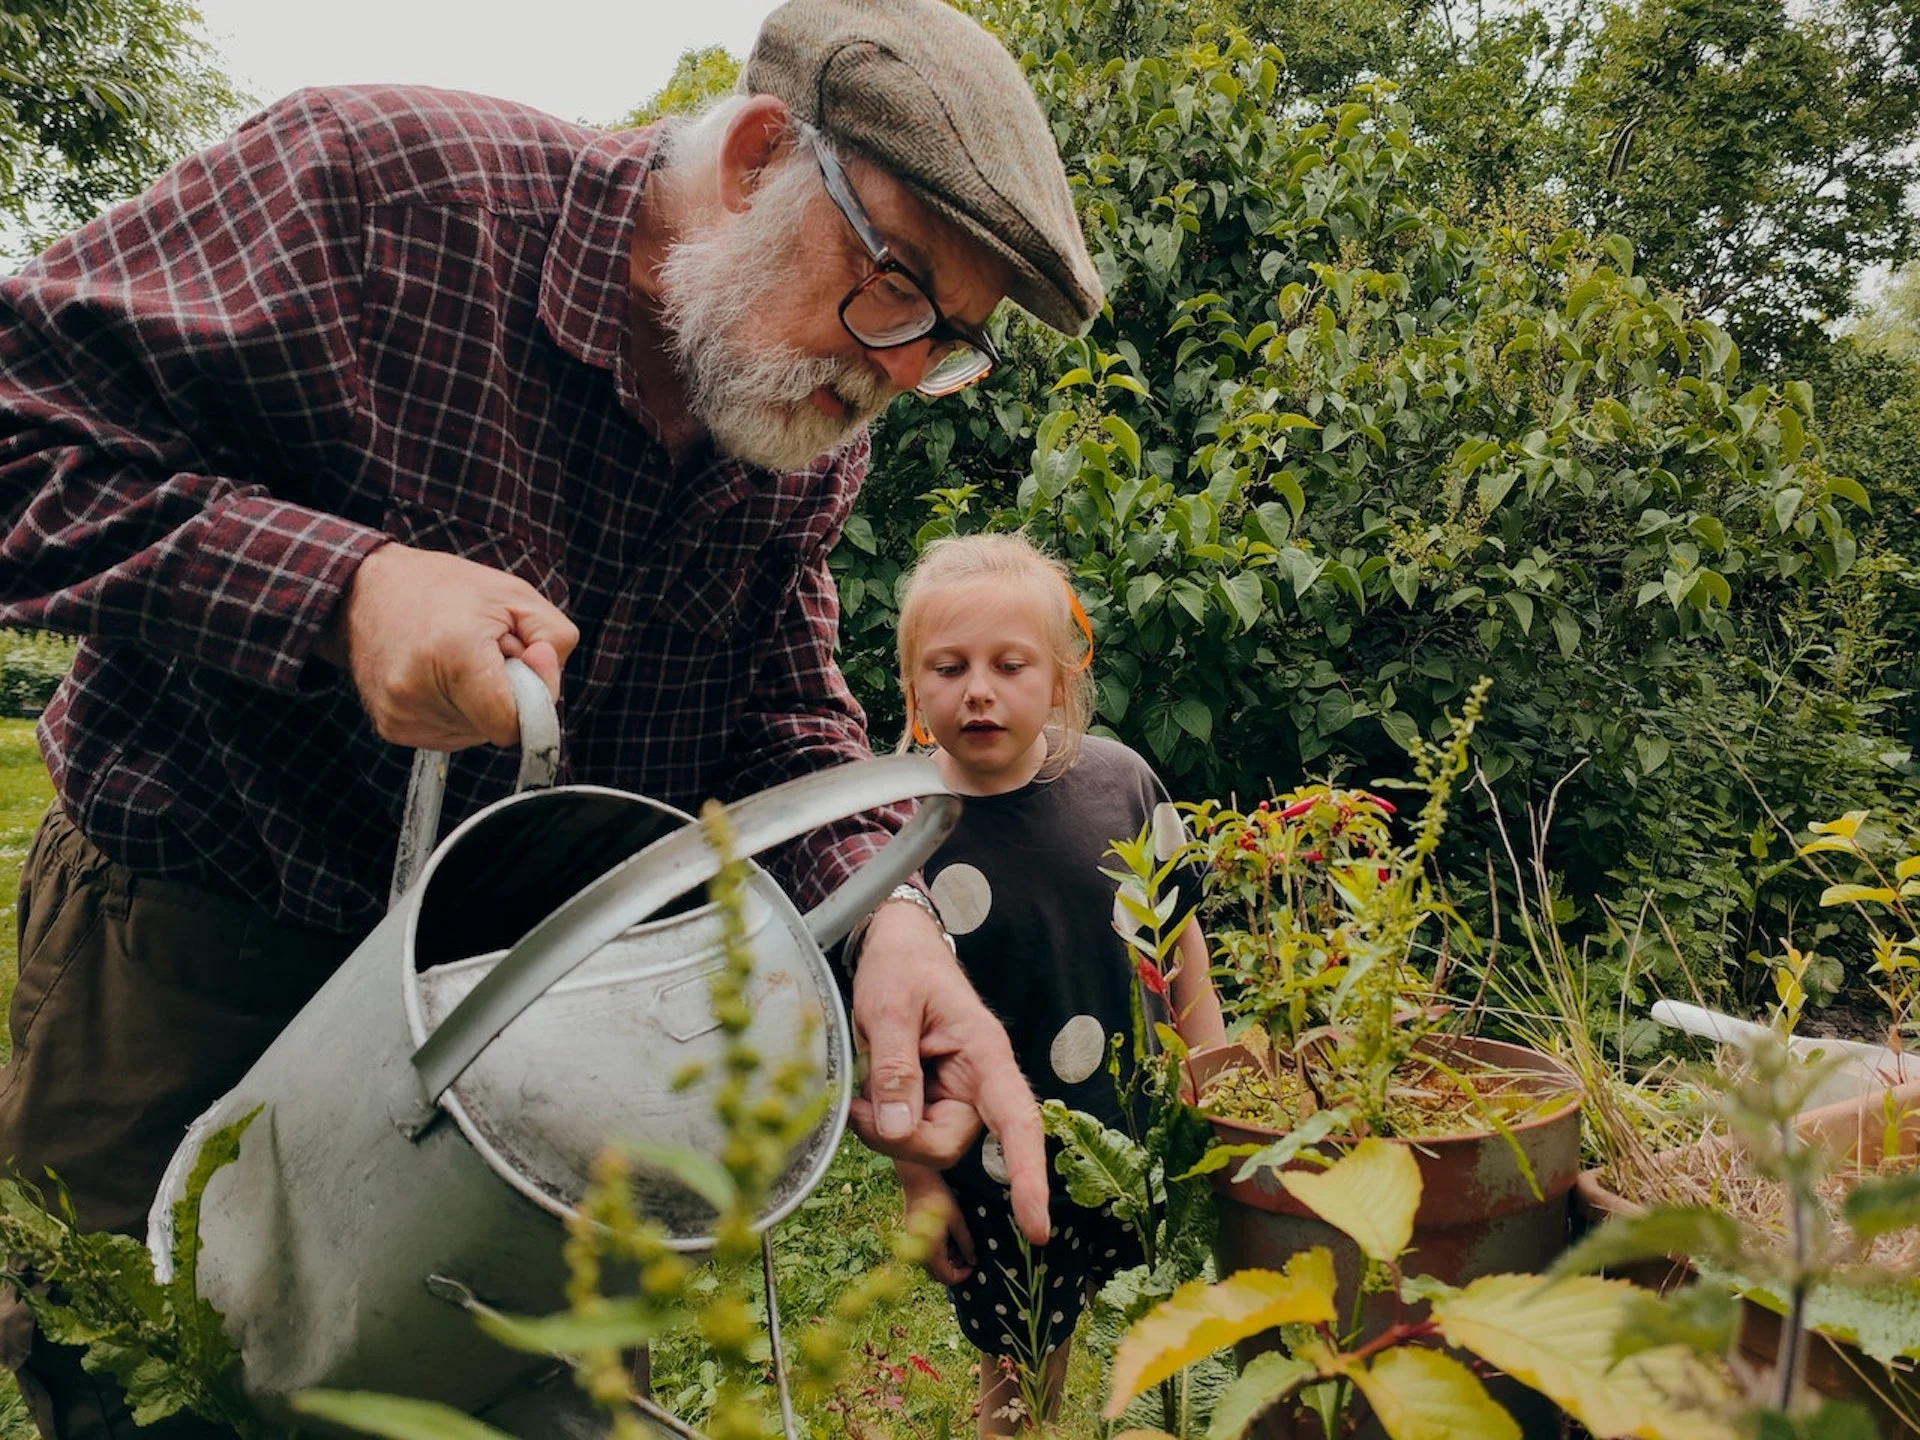 Intergenerational gardening reaps benefits for people and wildlife